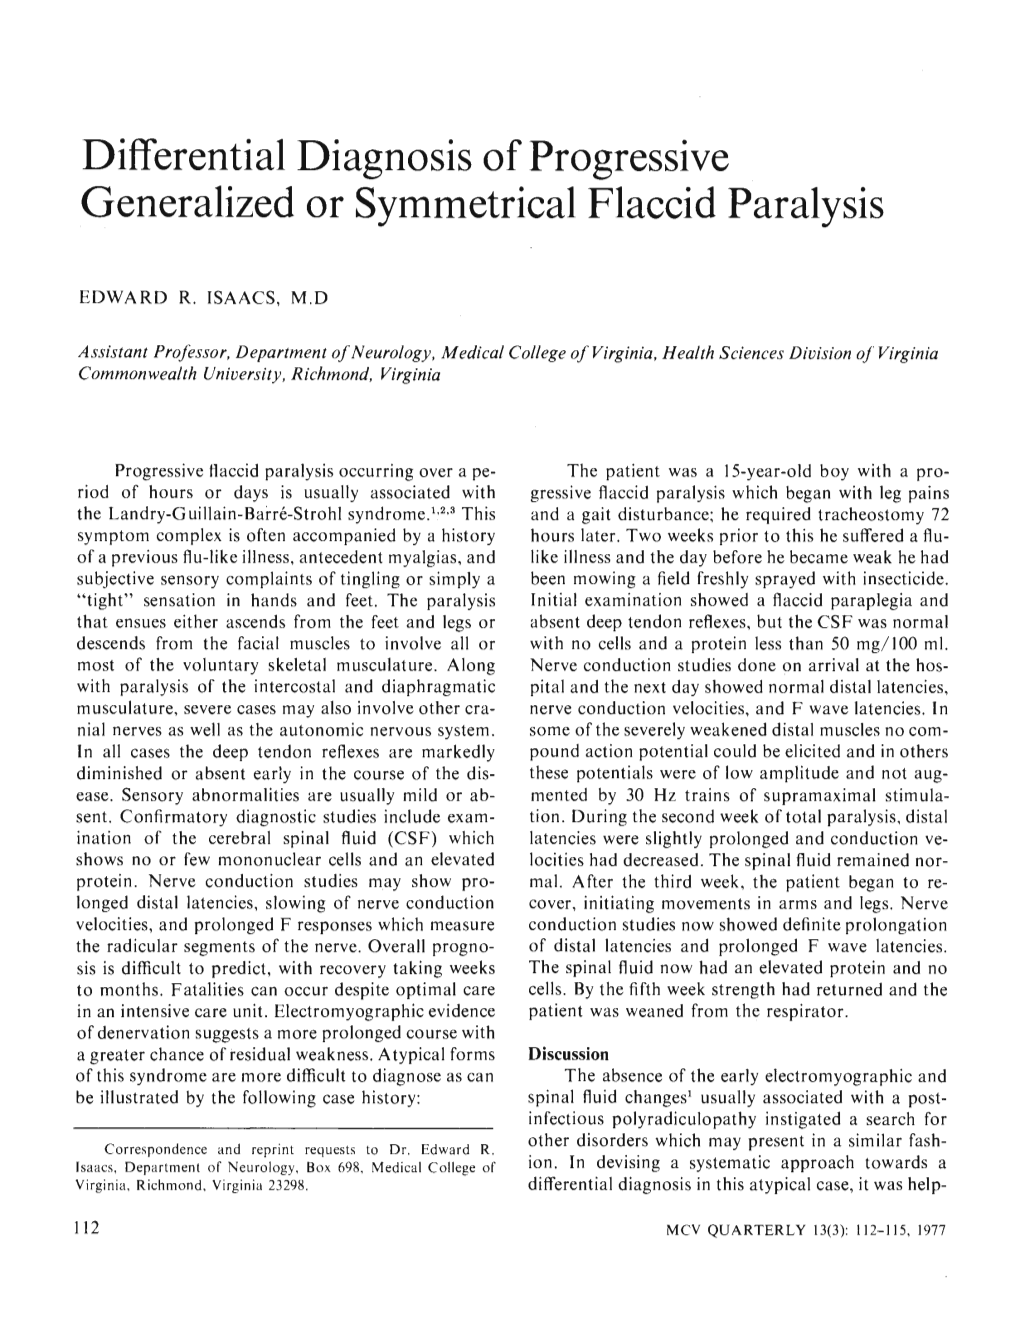 Differential Diagnosis of Progressive Generalized Or Symmetrical Flaccid Paralysis